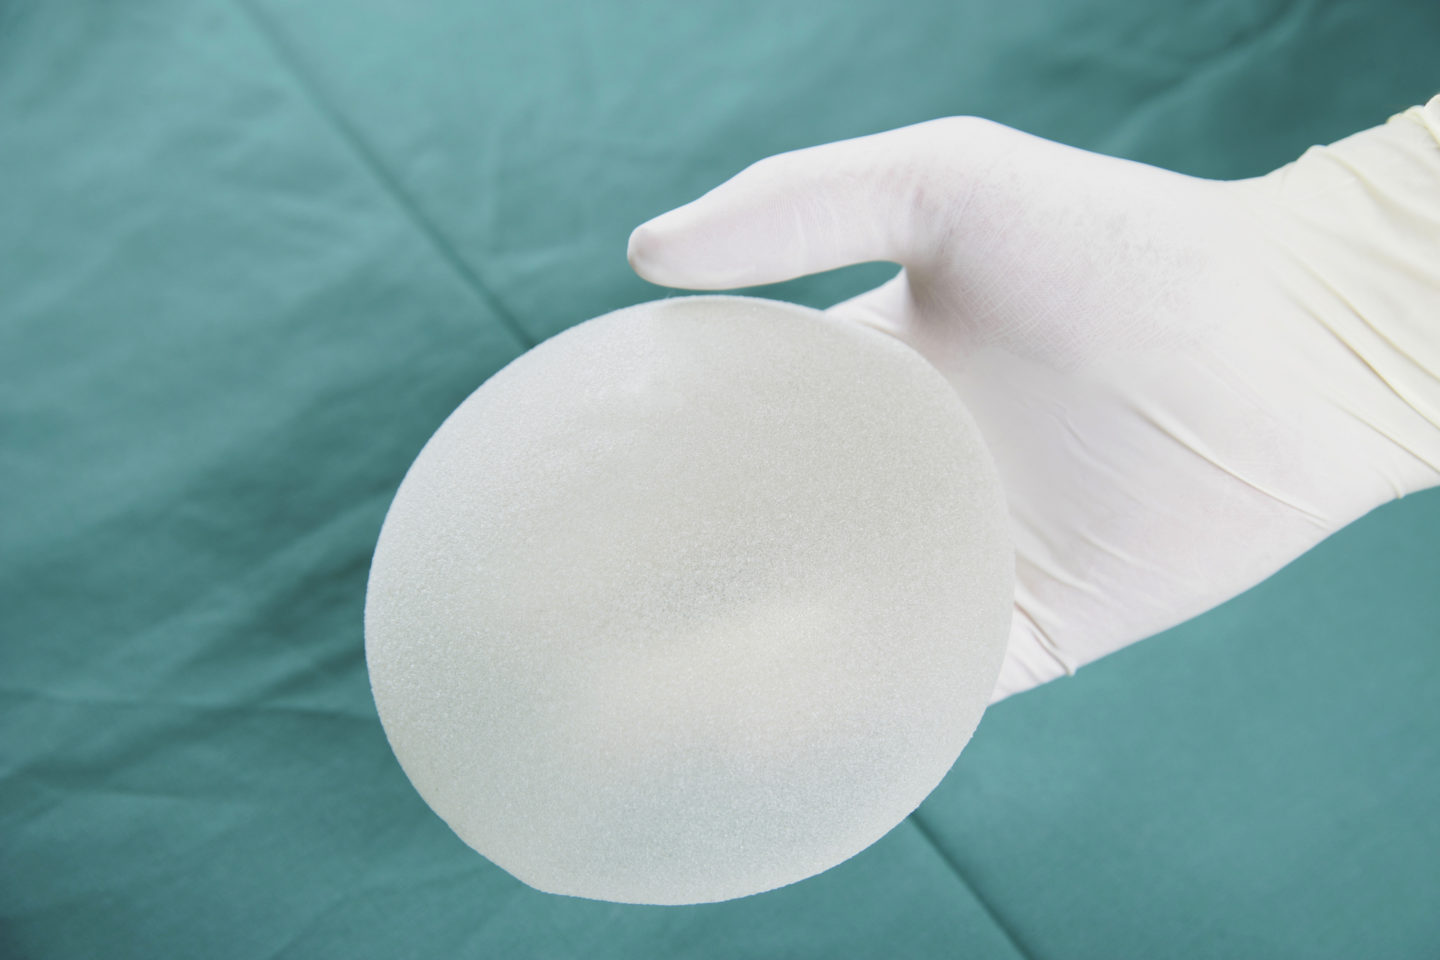 This Rare Cancer Is Linked to Breast Implants